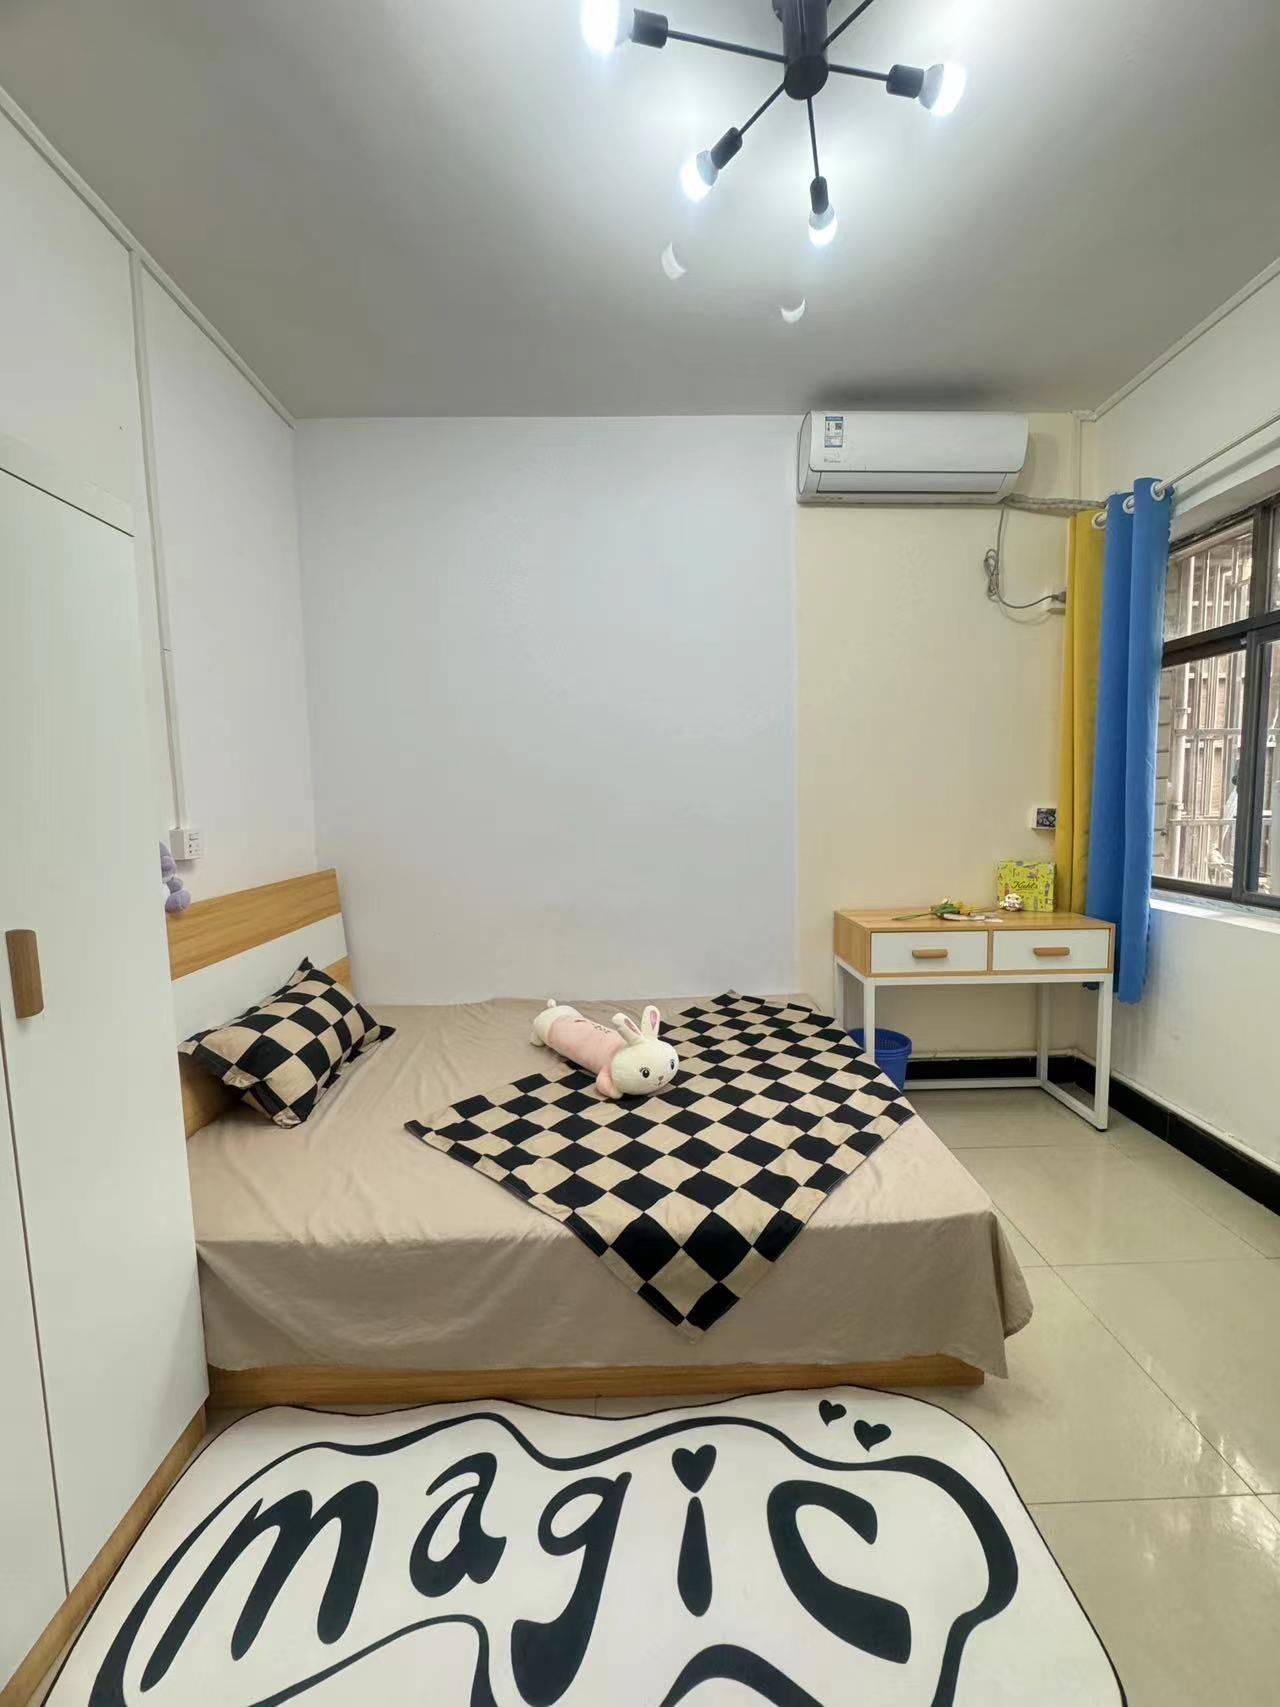 Changsha-Tianxin-Cozy Home,Clean&Comfy,No Gender Limit,Chilled